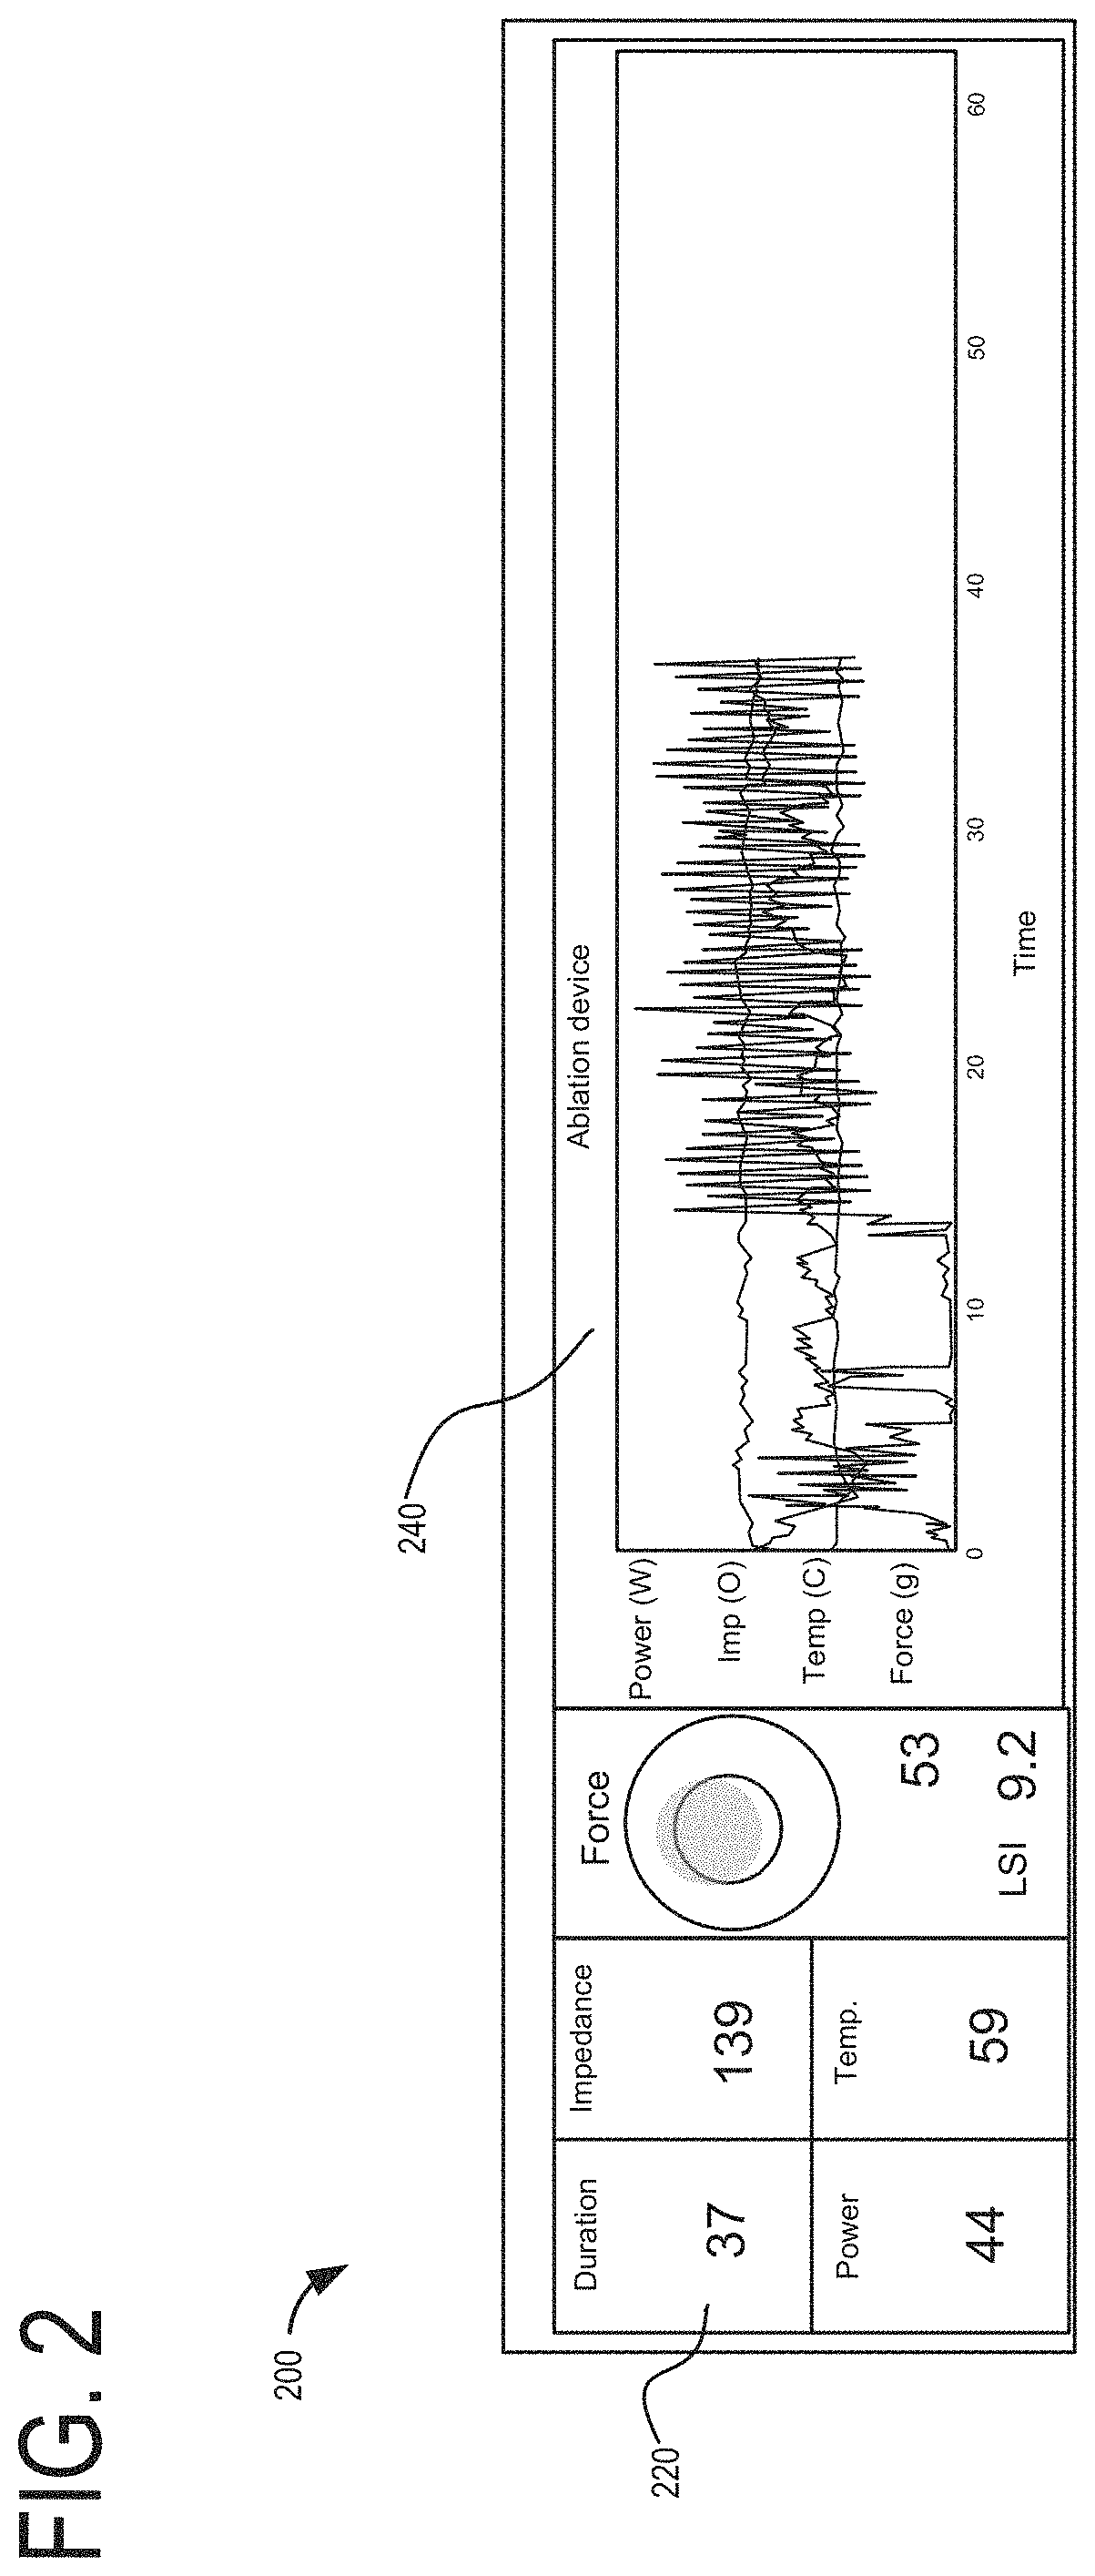 Methods and systems for electrophysiology ablation gap analysis